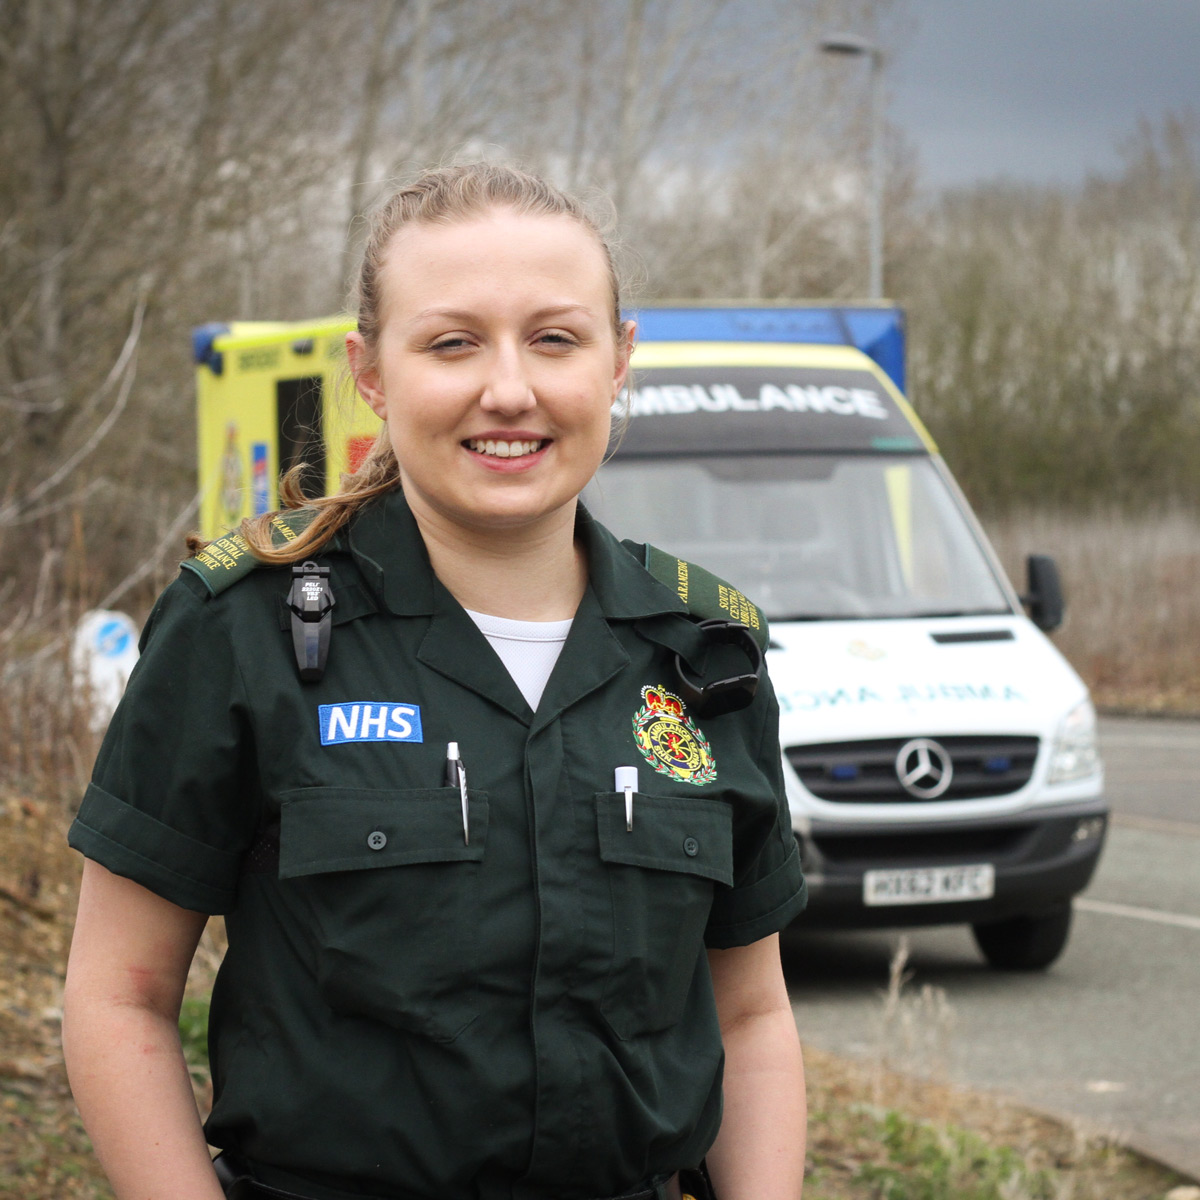 SCAS Paramedic standing in front of an ambulance